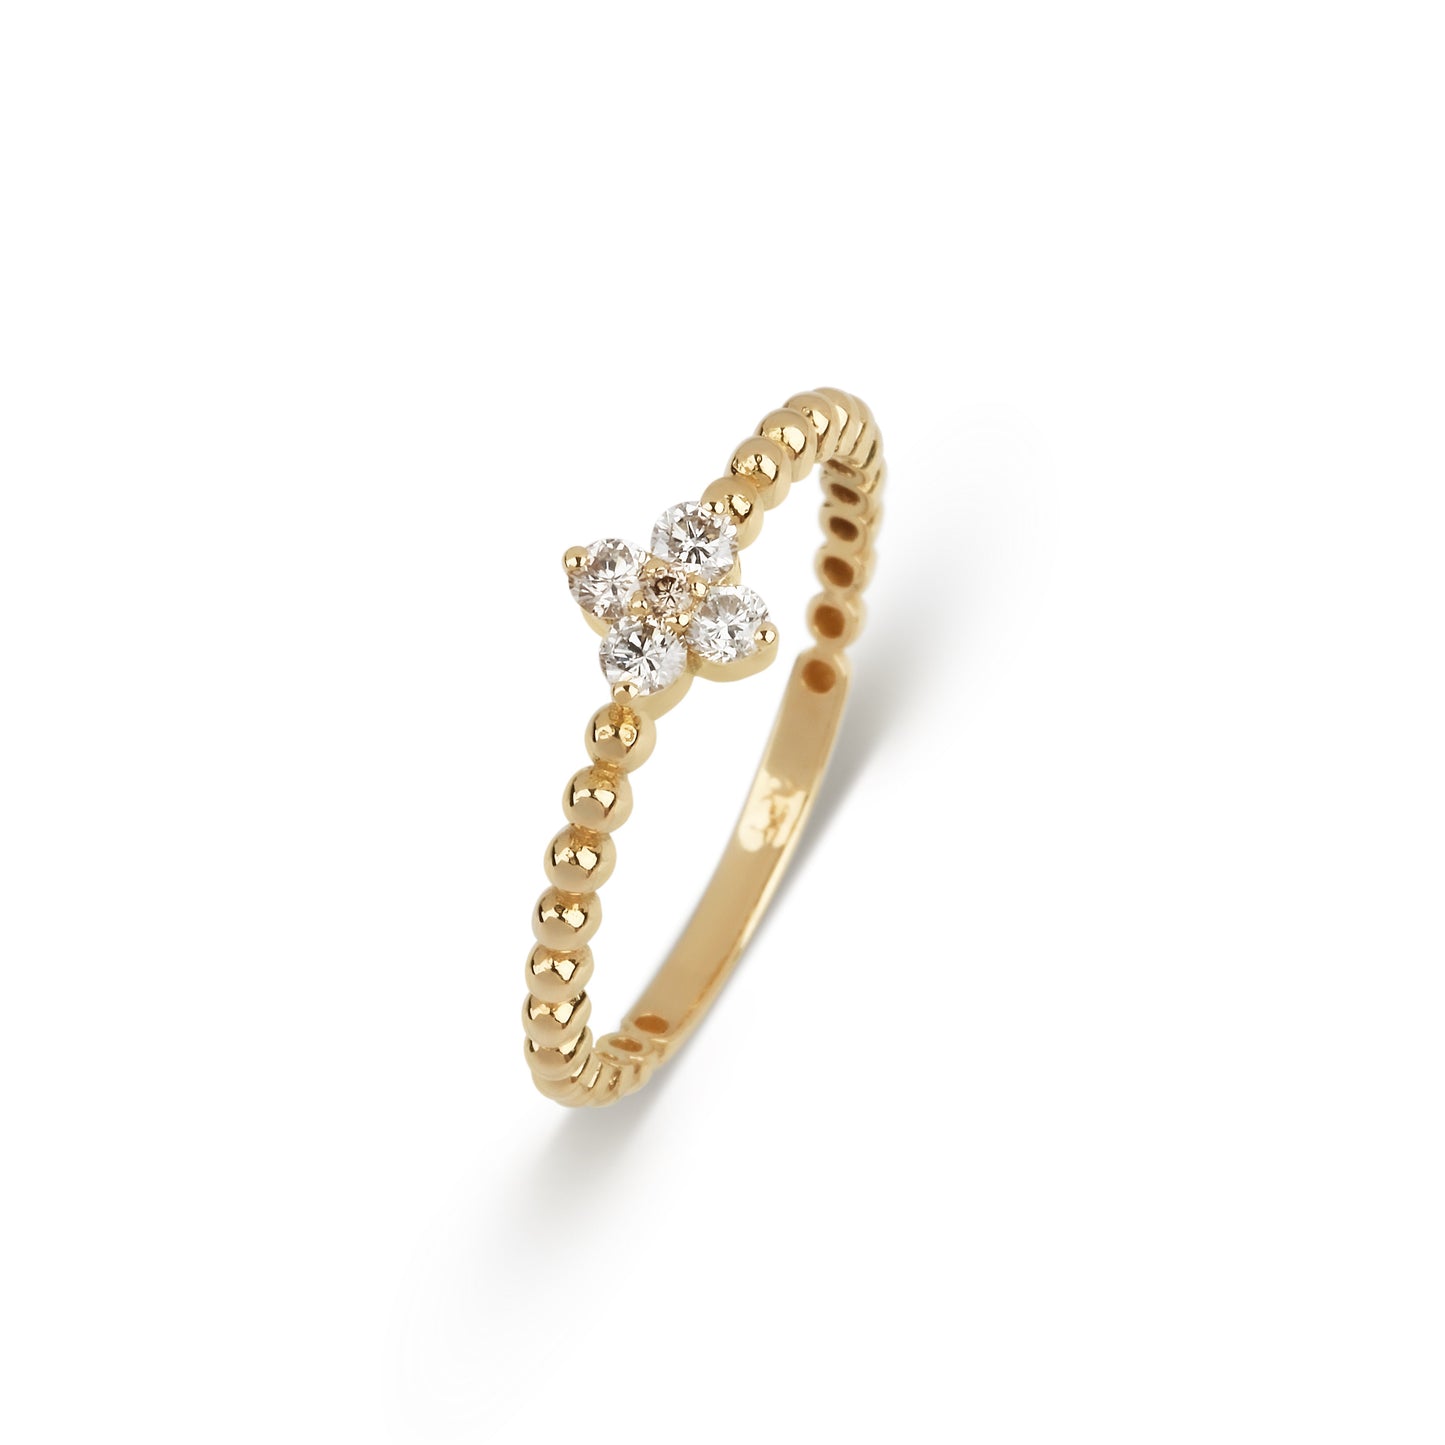 Lili Flower Diamonds & Gold Ring | diamond rings | Best places to buy jewelry